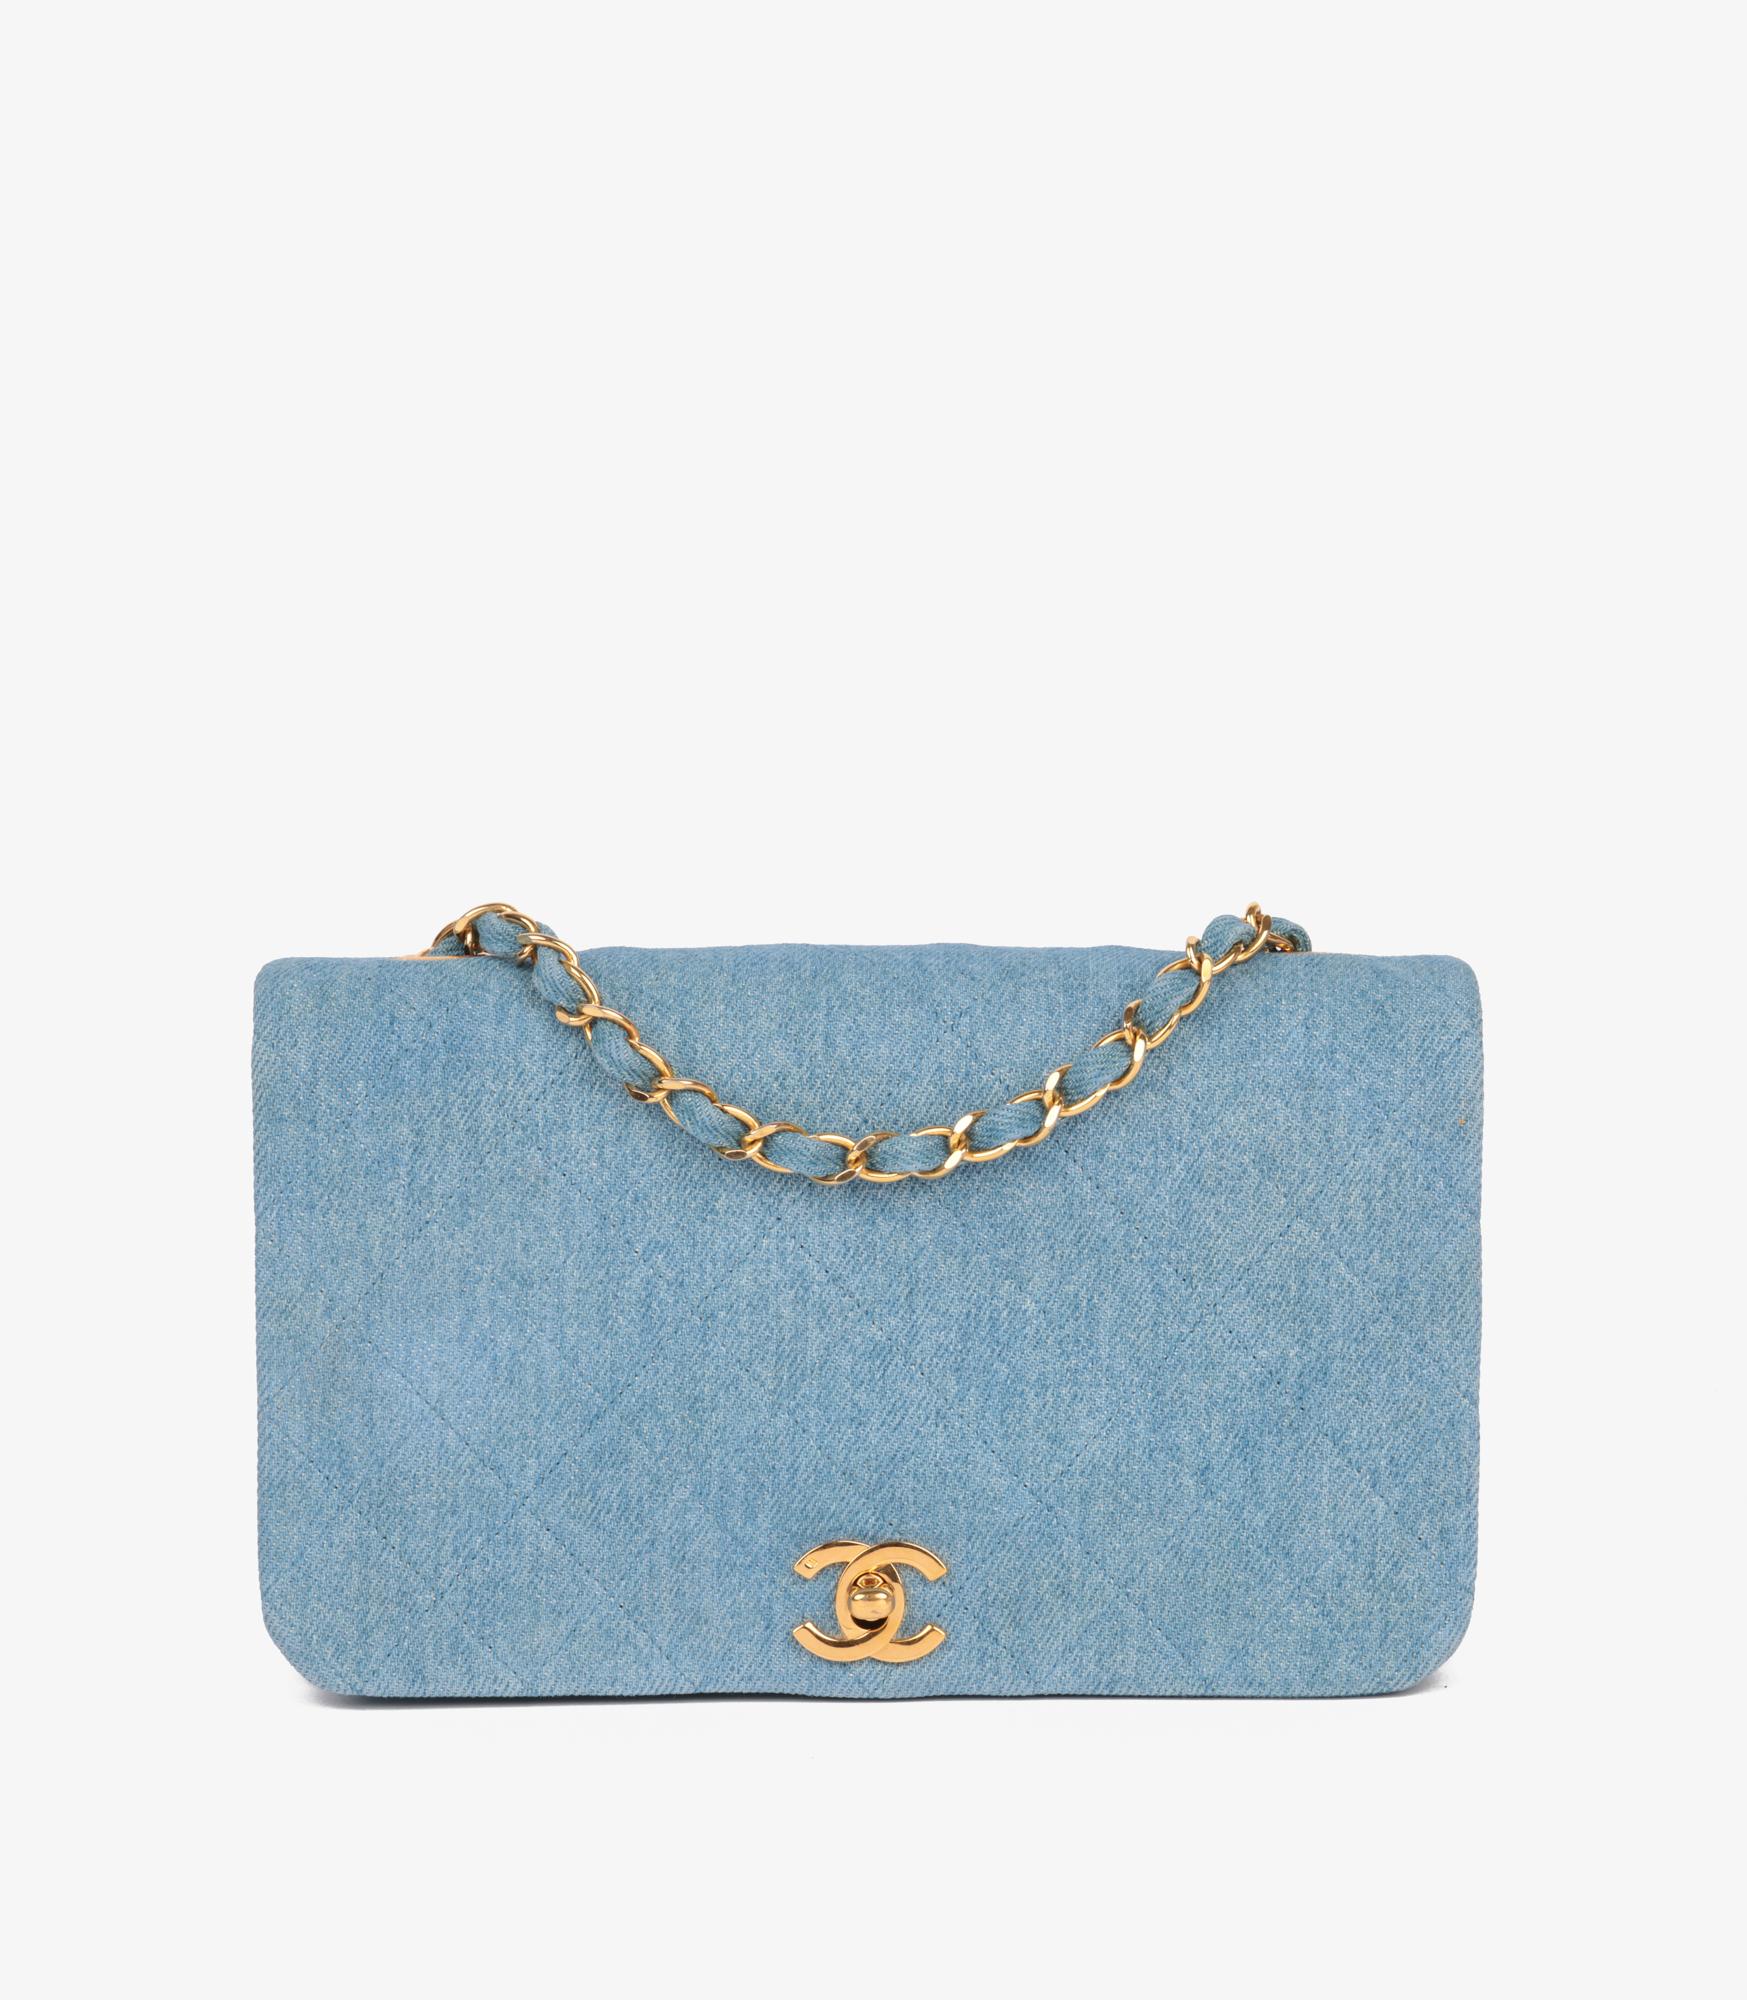 Chanel Blue Quilted Denim Small Classic Single Full Flap Bag

Brand- Chanel
Model- Small Classic Single full Flap Bag
Product Type- Crossbody, Shoulder
Serial Number- 1694049
Age- Circa 1989
Accompanied By- Chanel Dust Bag
Colour- Blue
Hardware-